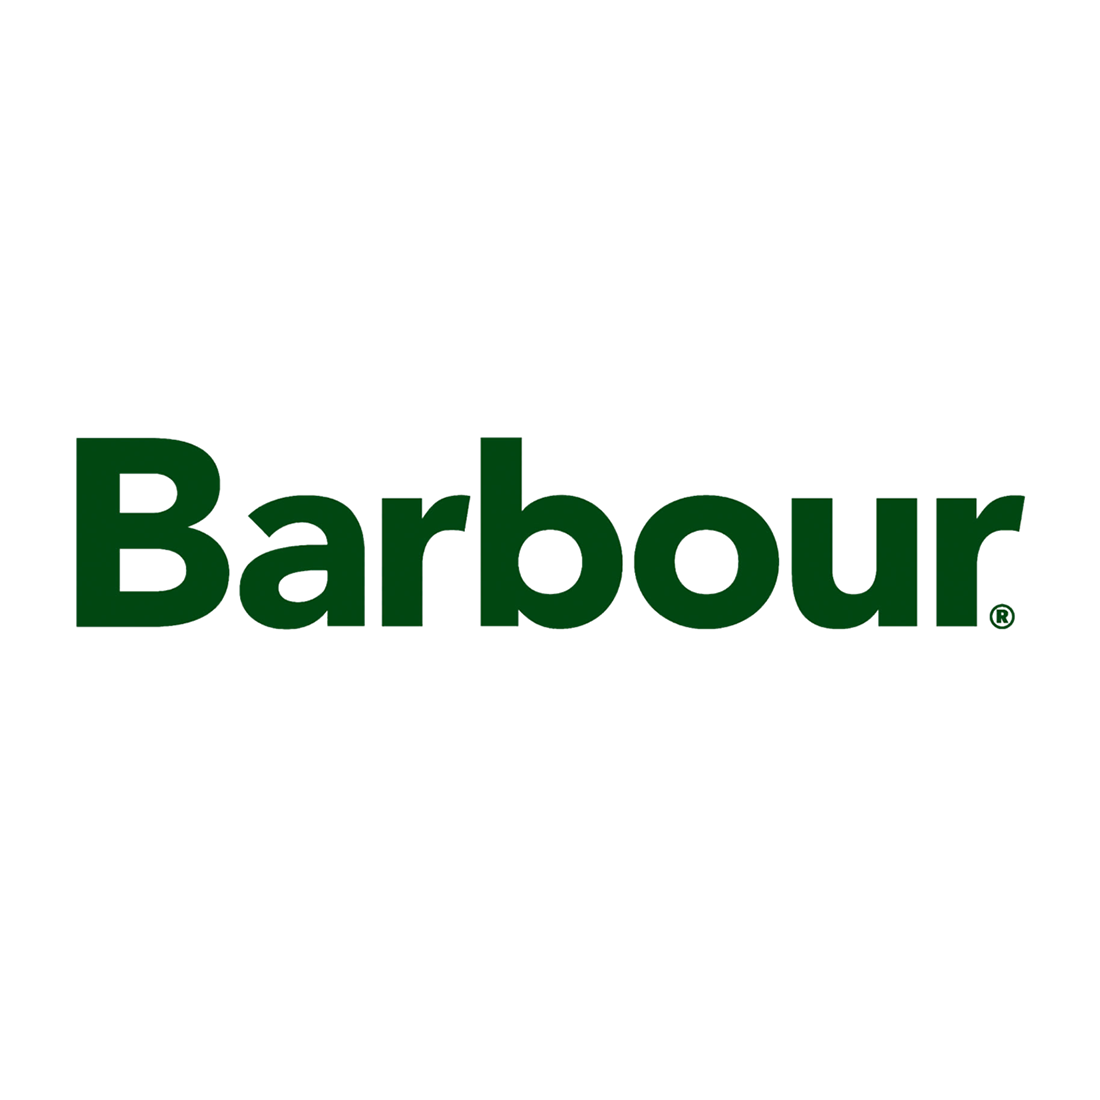 barbour clothing uk